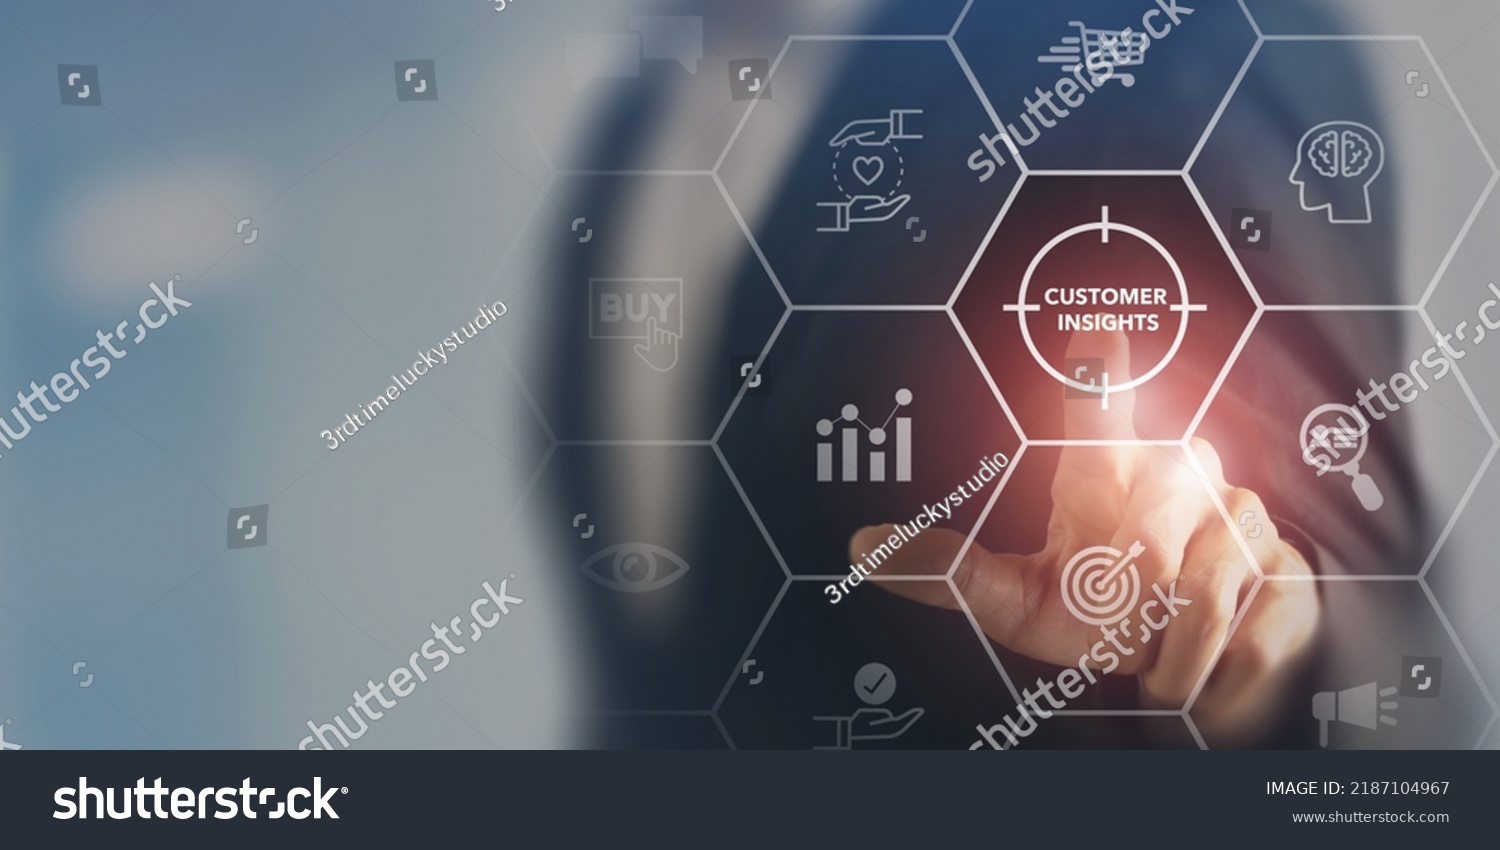 Customer insight marketing concept. Deep understanding of customers, their behaviors, preferences and  needs. Using customer insight to build strong customer relationship and increase customer loyalty #2187104967